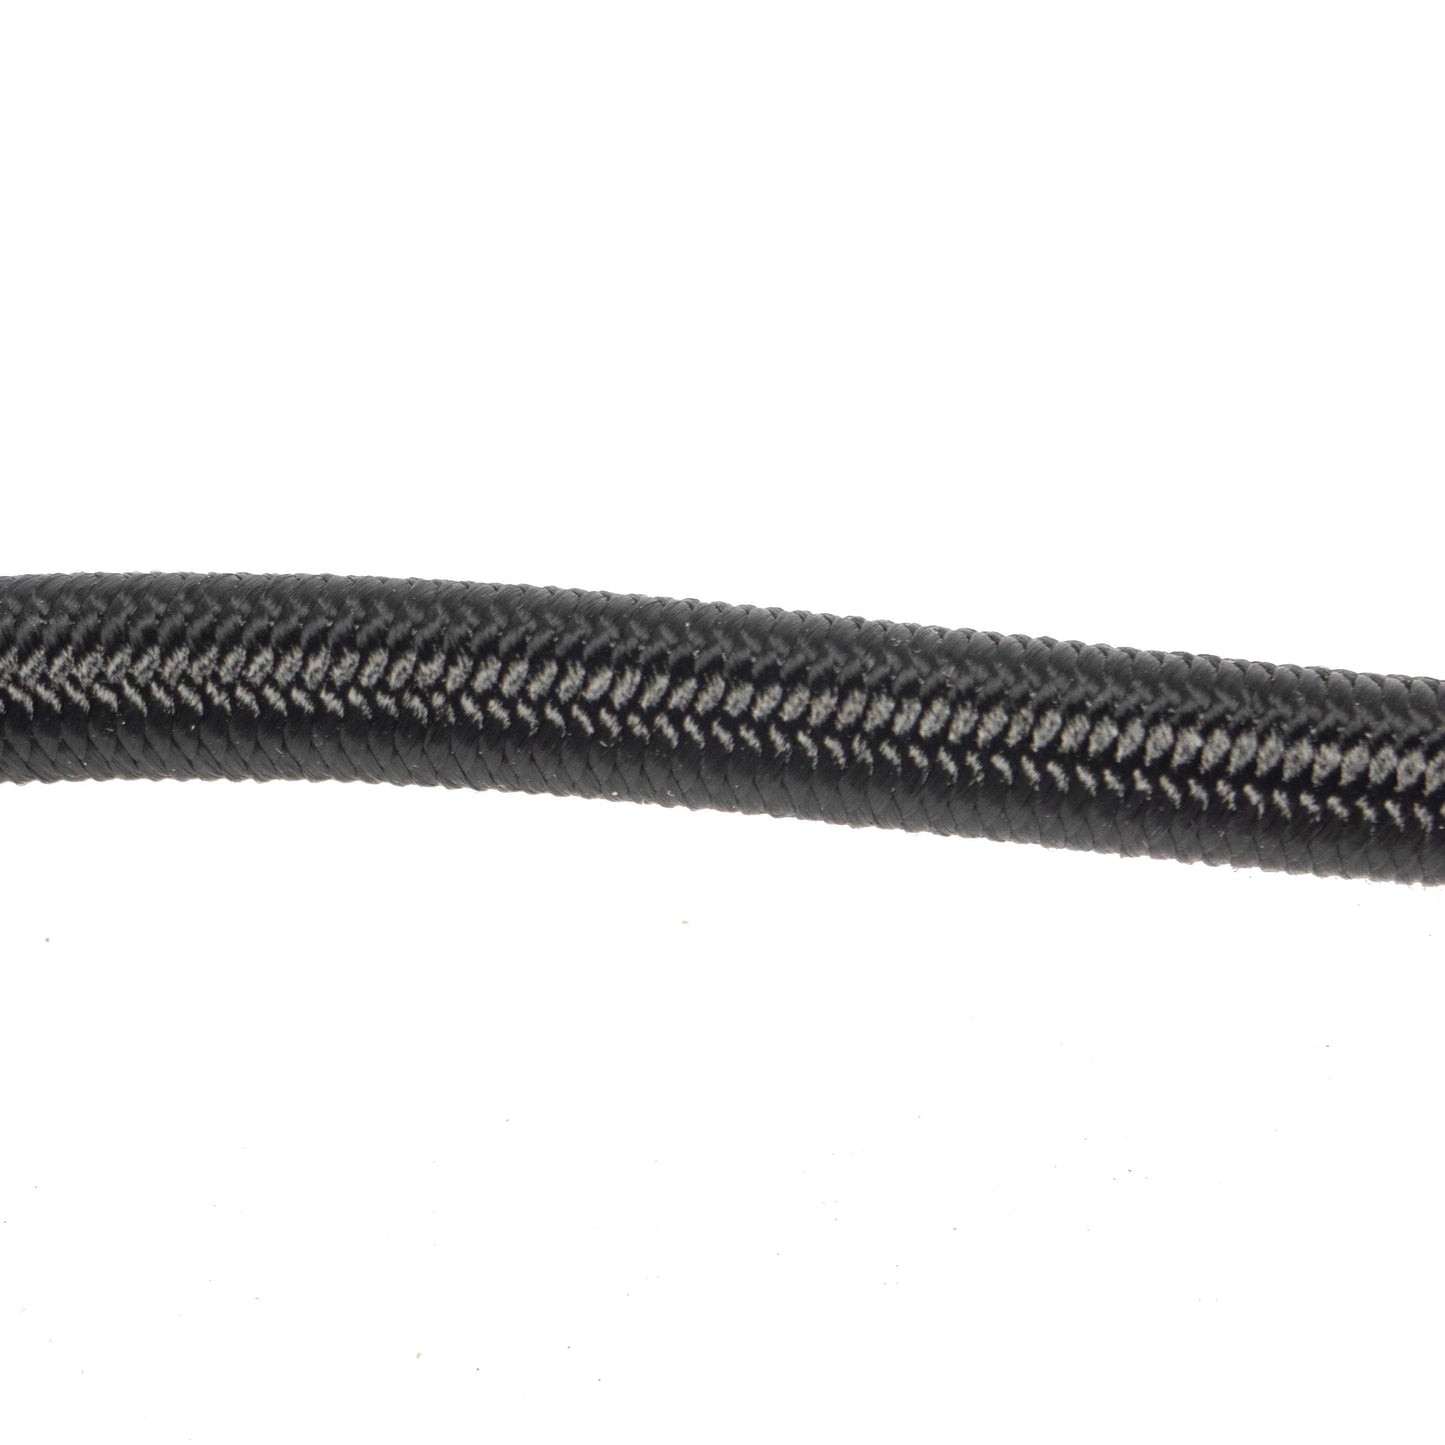 38 foot foot9mm Black Polyester Shock Cord Spool (300 foot) image 4 of 8